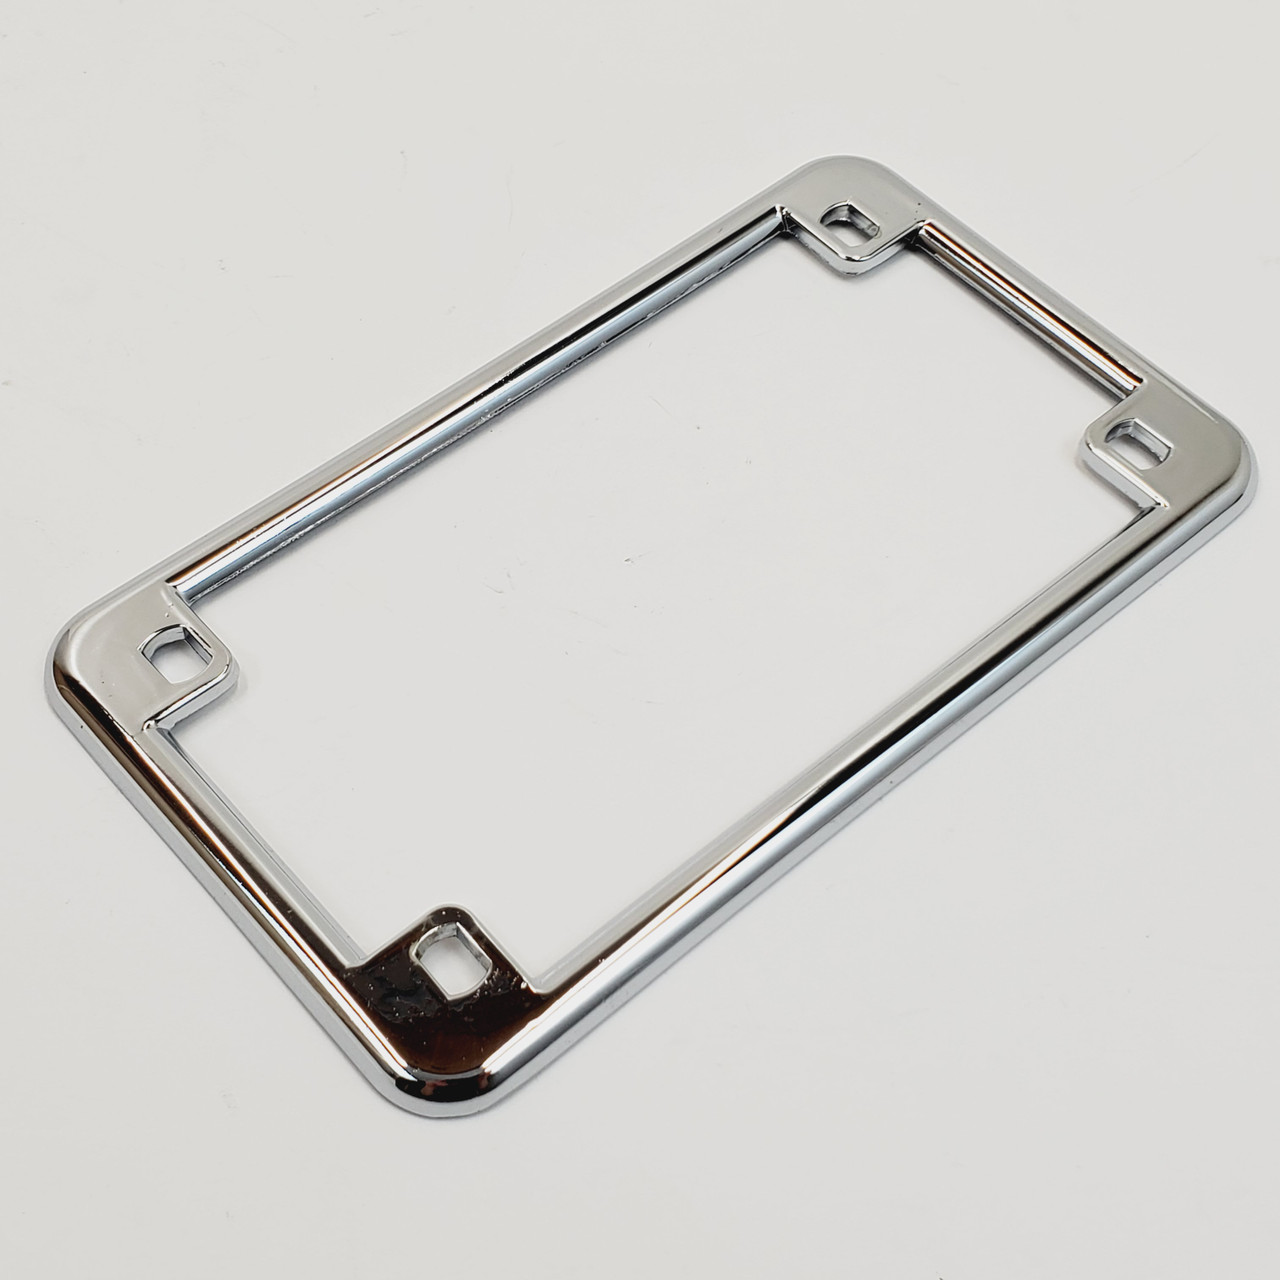 Chrome 7”x4” US Motorcycle License Plate Frame/Mount – Metal Frame, Built  to Last – 7-1/4”x4-1/4” Overall Dimensions (5-3/4”x2-3/4” Center-to-Center  Mounting Holes) (BPD-13201)